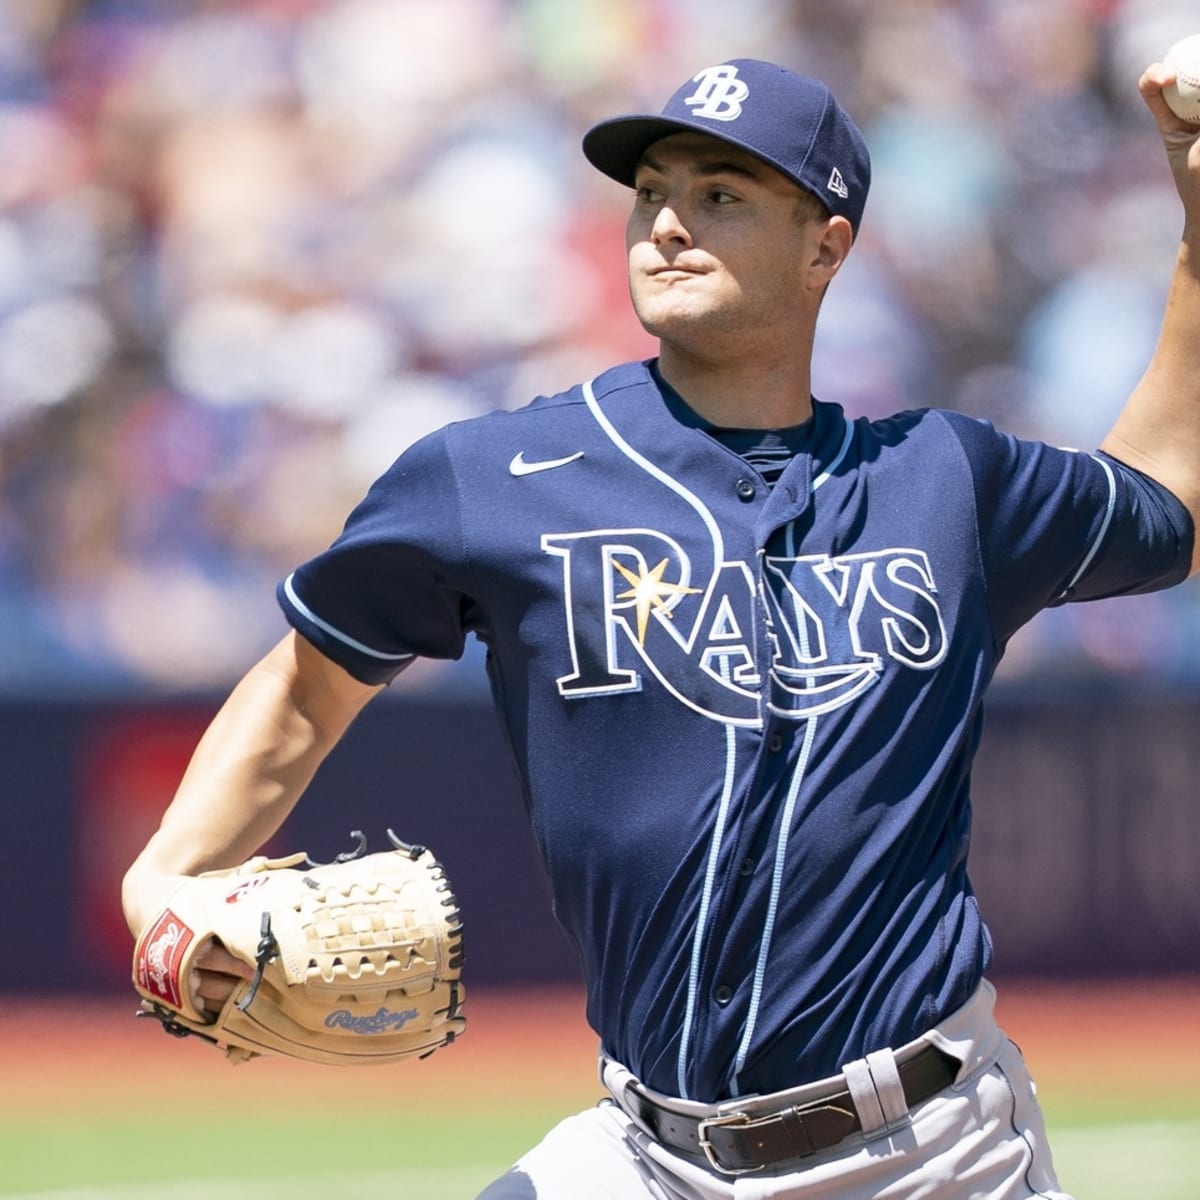 Shane McClanahan becomes MLB's first 10-game winner, Rays top